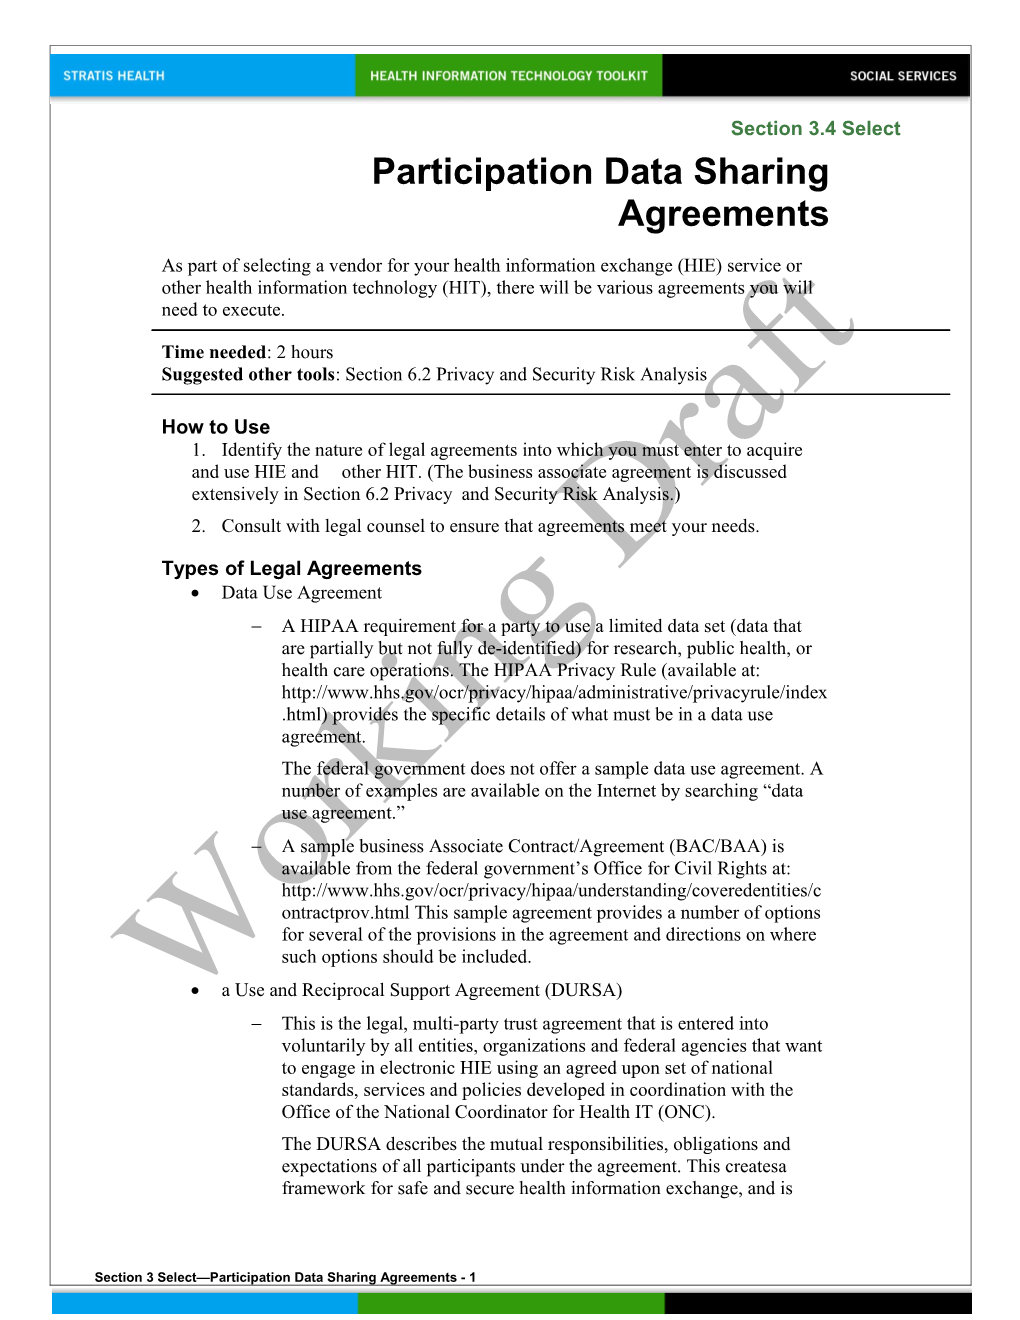 3 Participation Data Sharing Agreements